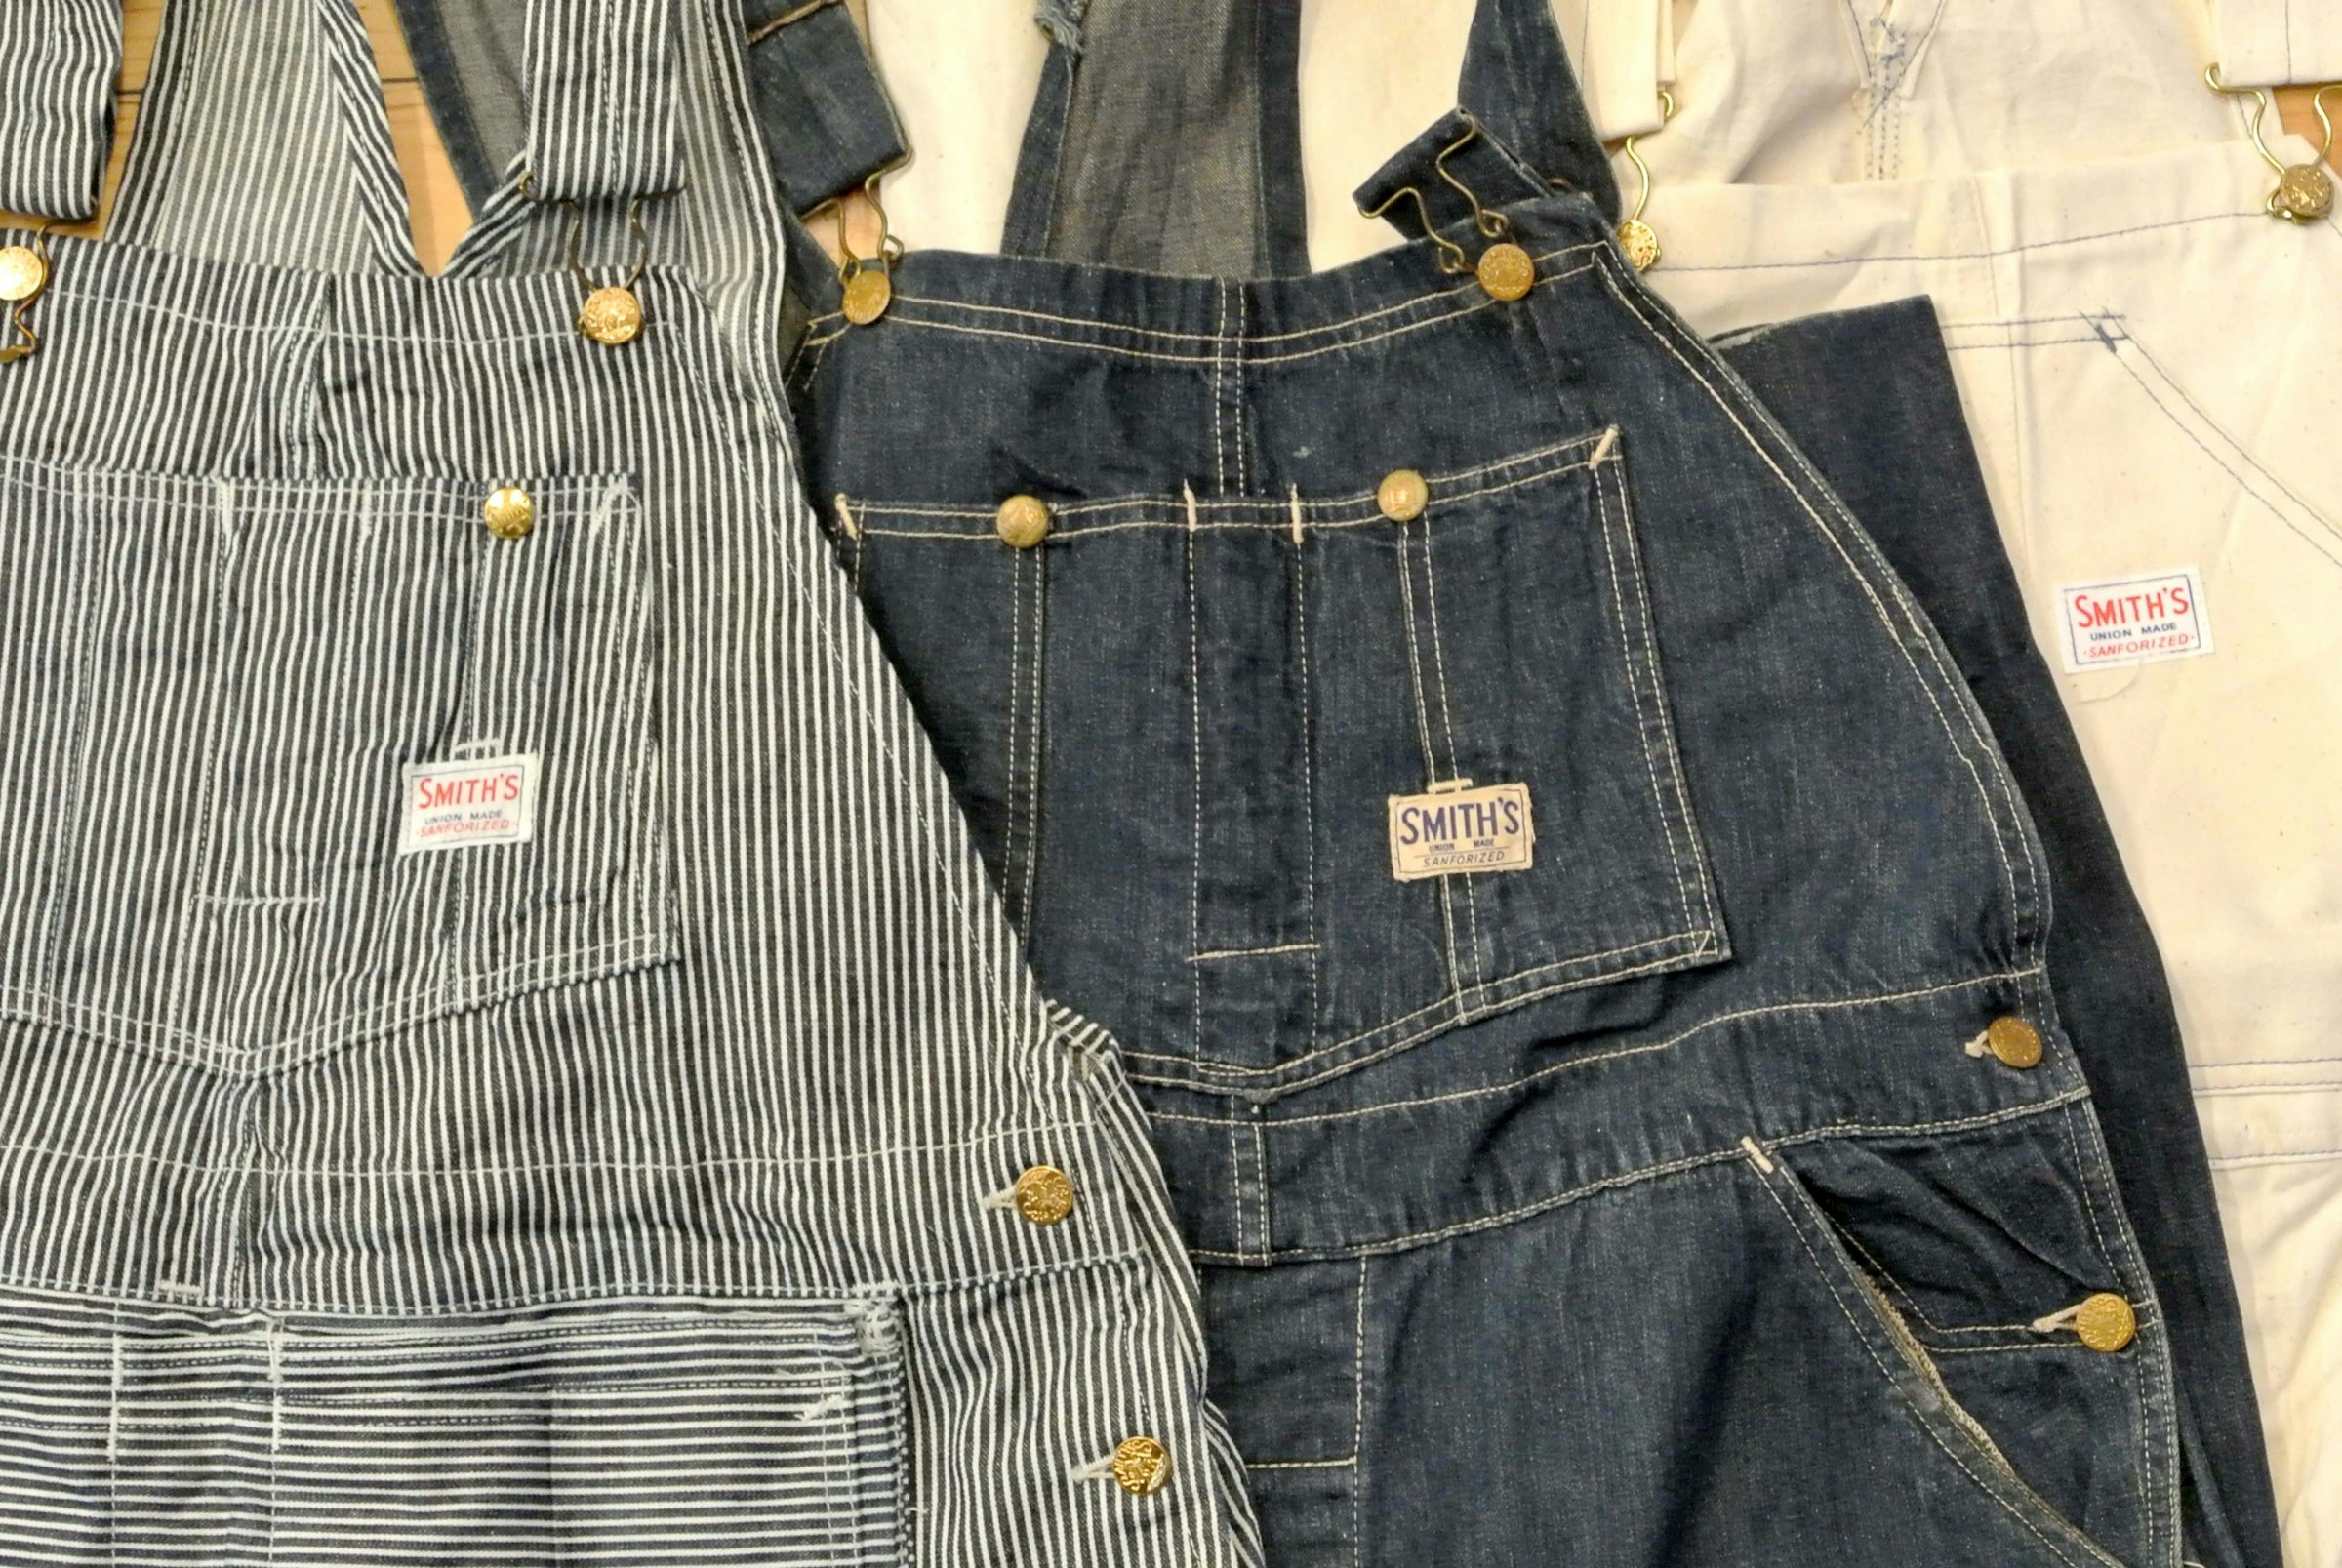 SMITH'S AMERICAN overalls from the 1940s and 1960s preserved in excellent condition at MINOYA CO., LTD, some of which are deadstock